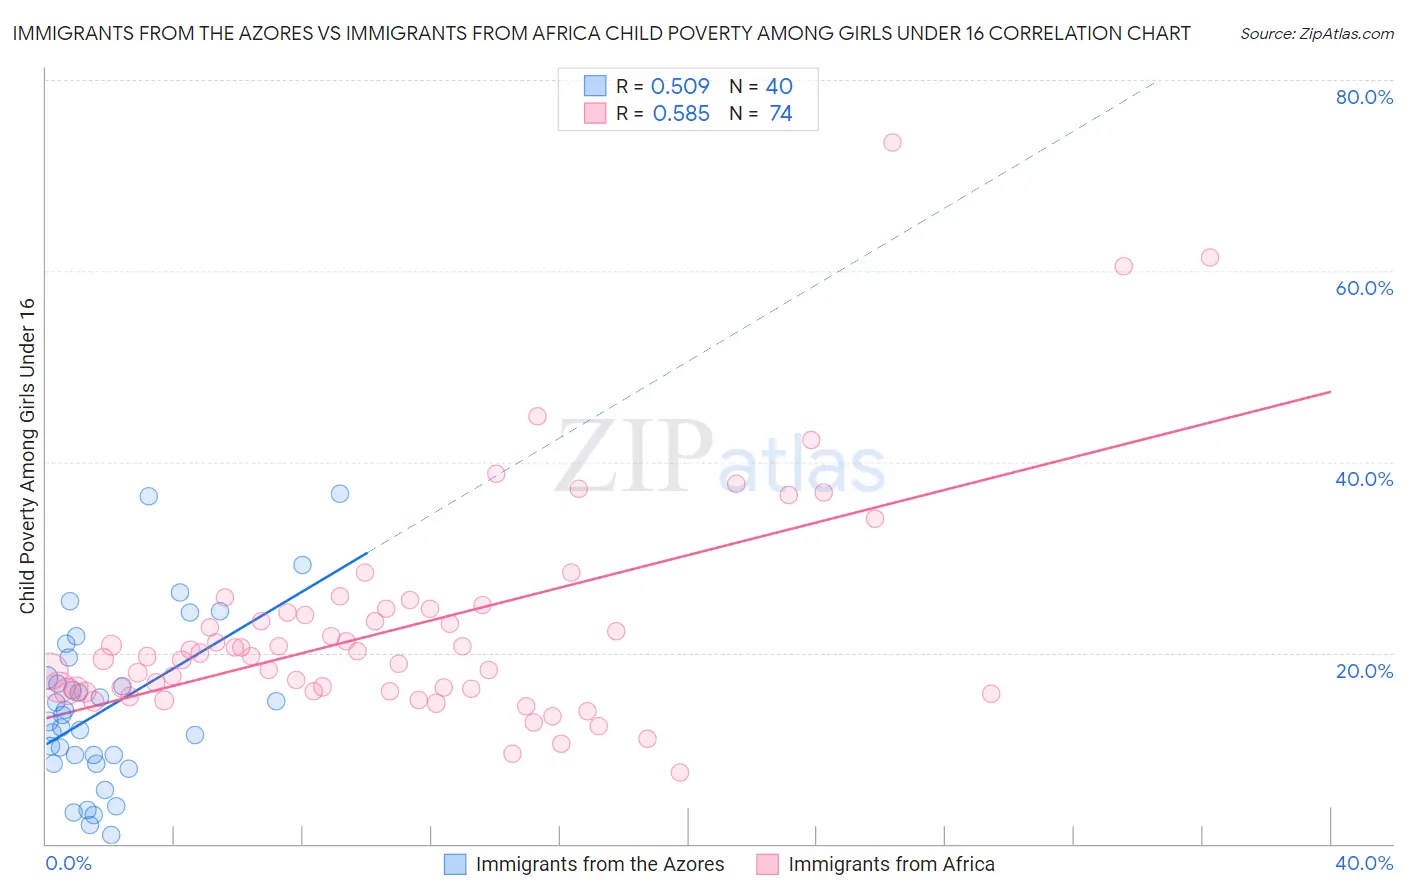 Immigrants from the Azores vs Immigrants from Africa Child Poverty Among Girls Under 16